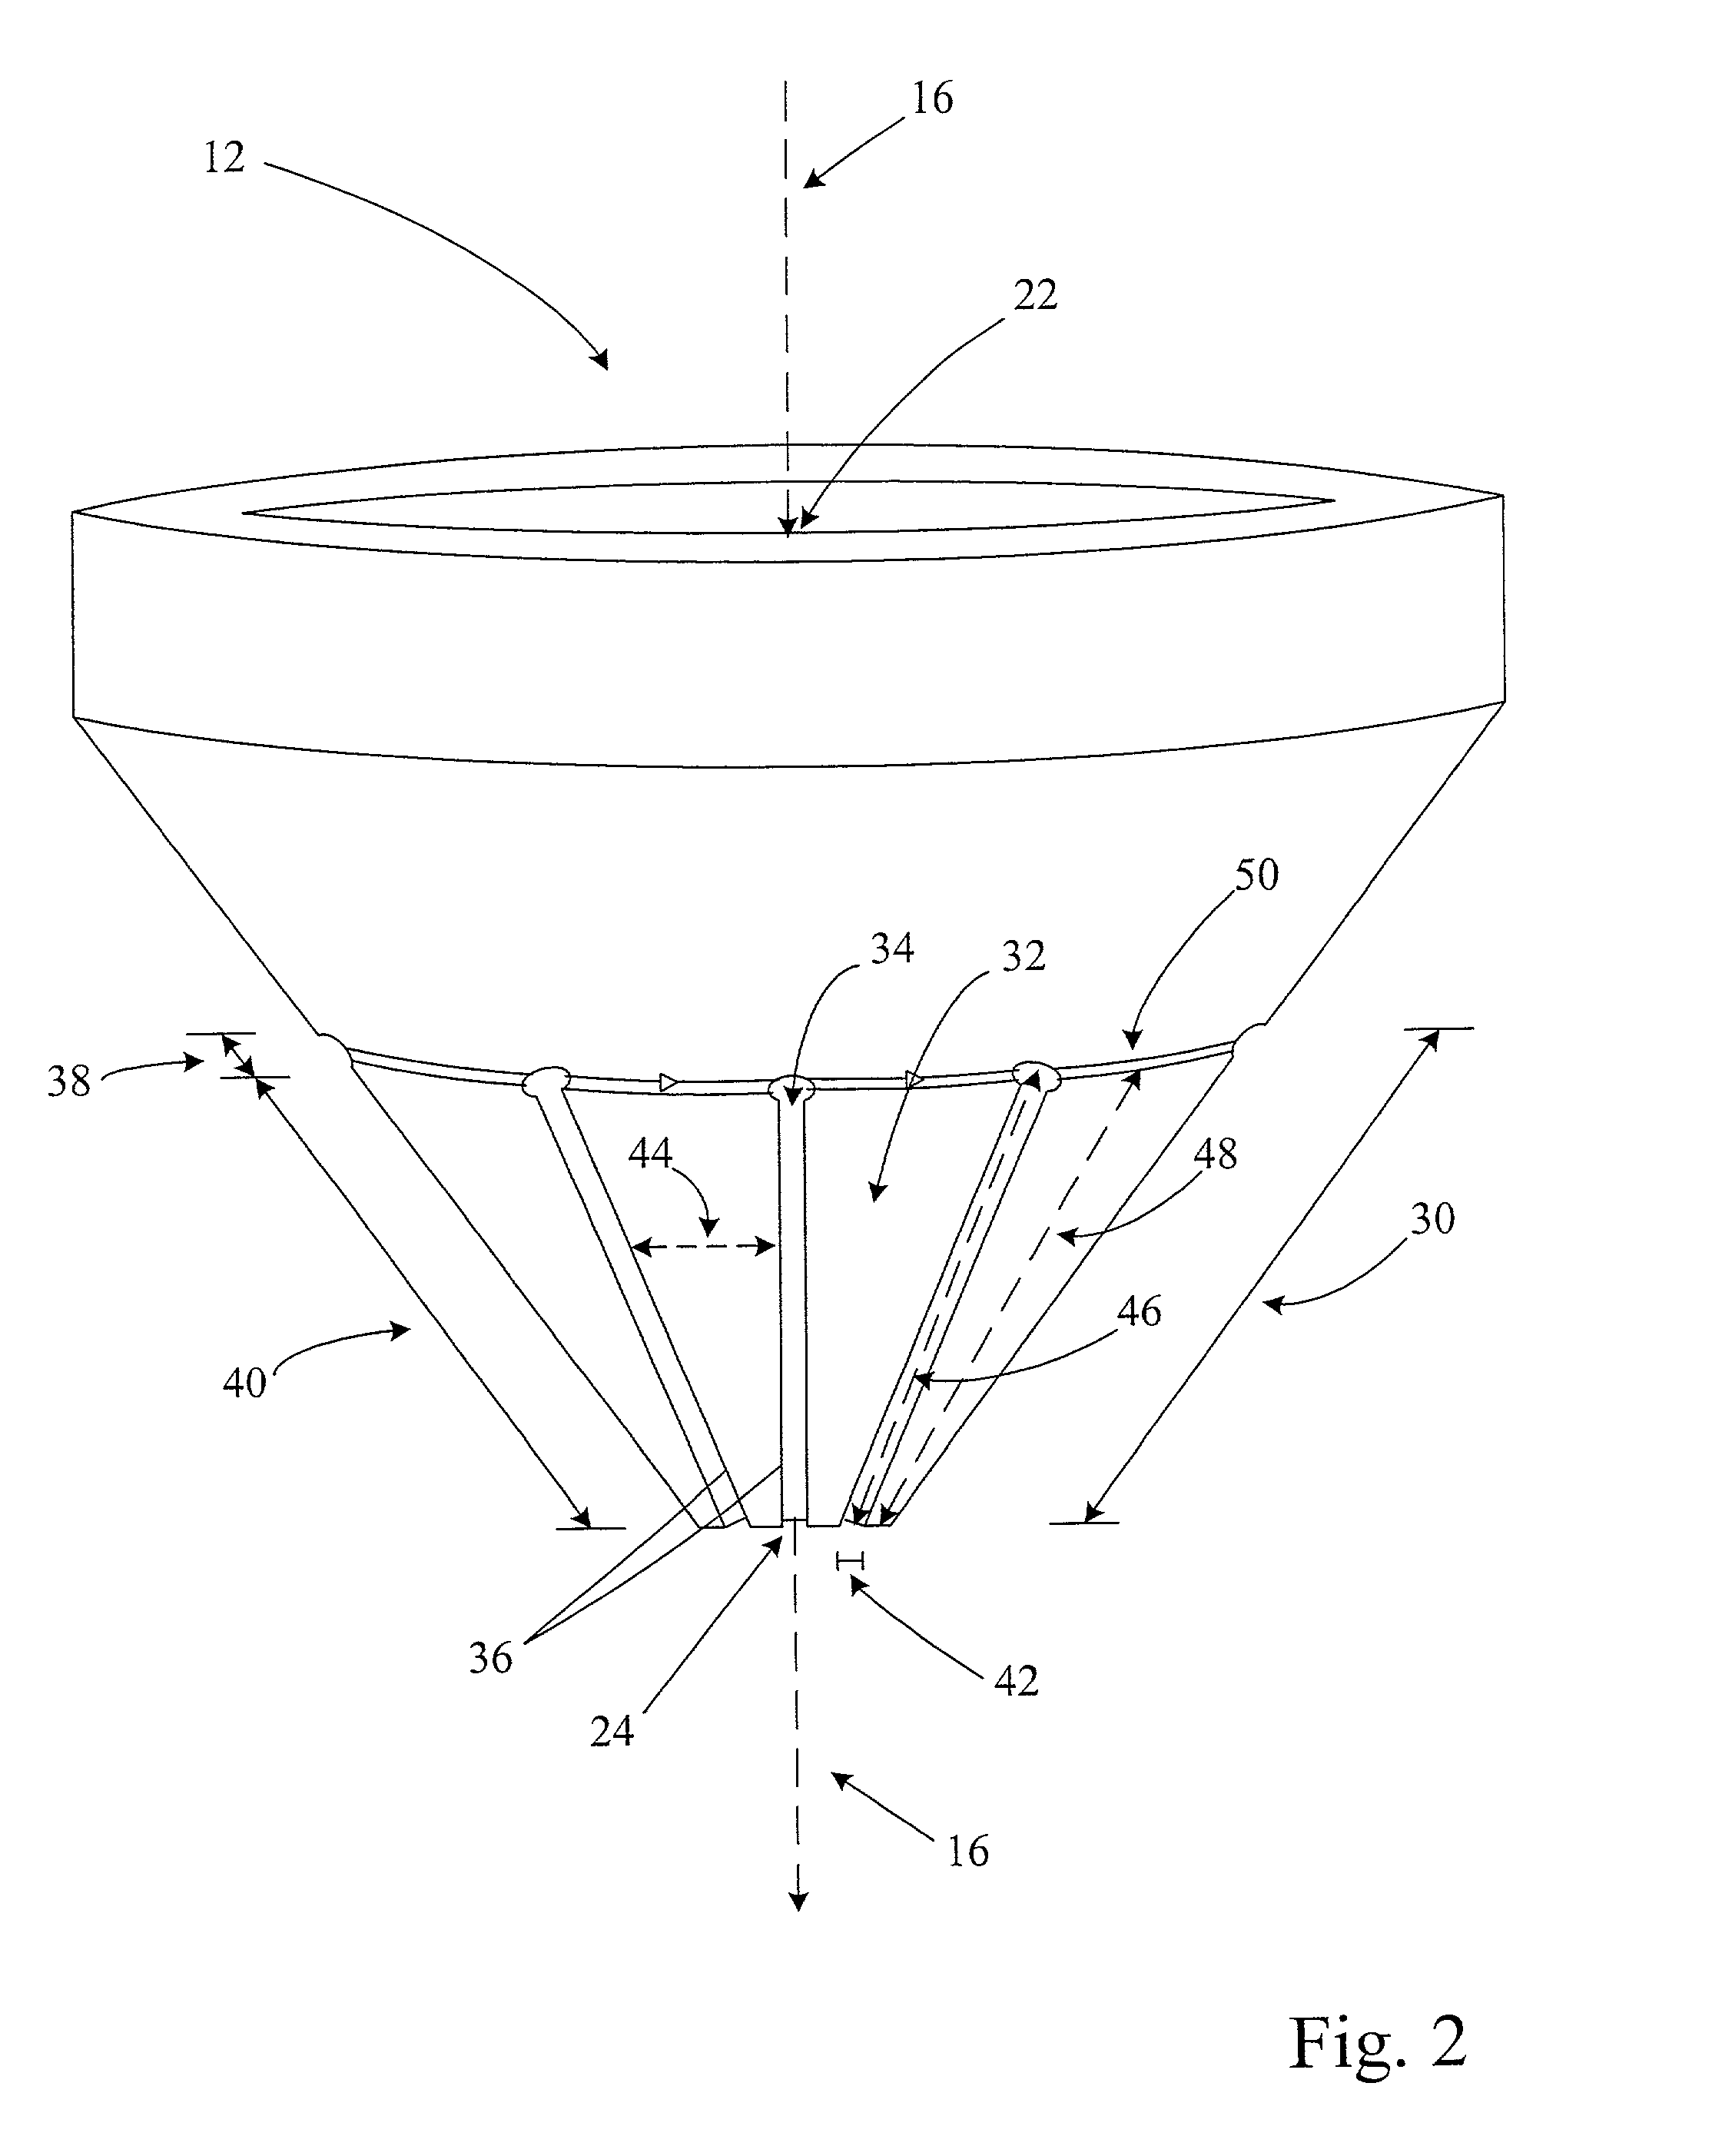 Apparatus and method for applying feedback control to a magnetic lens